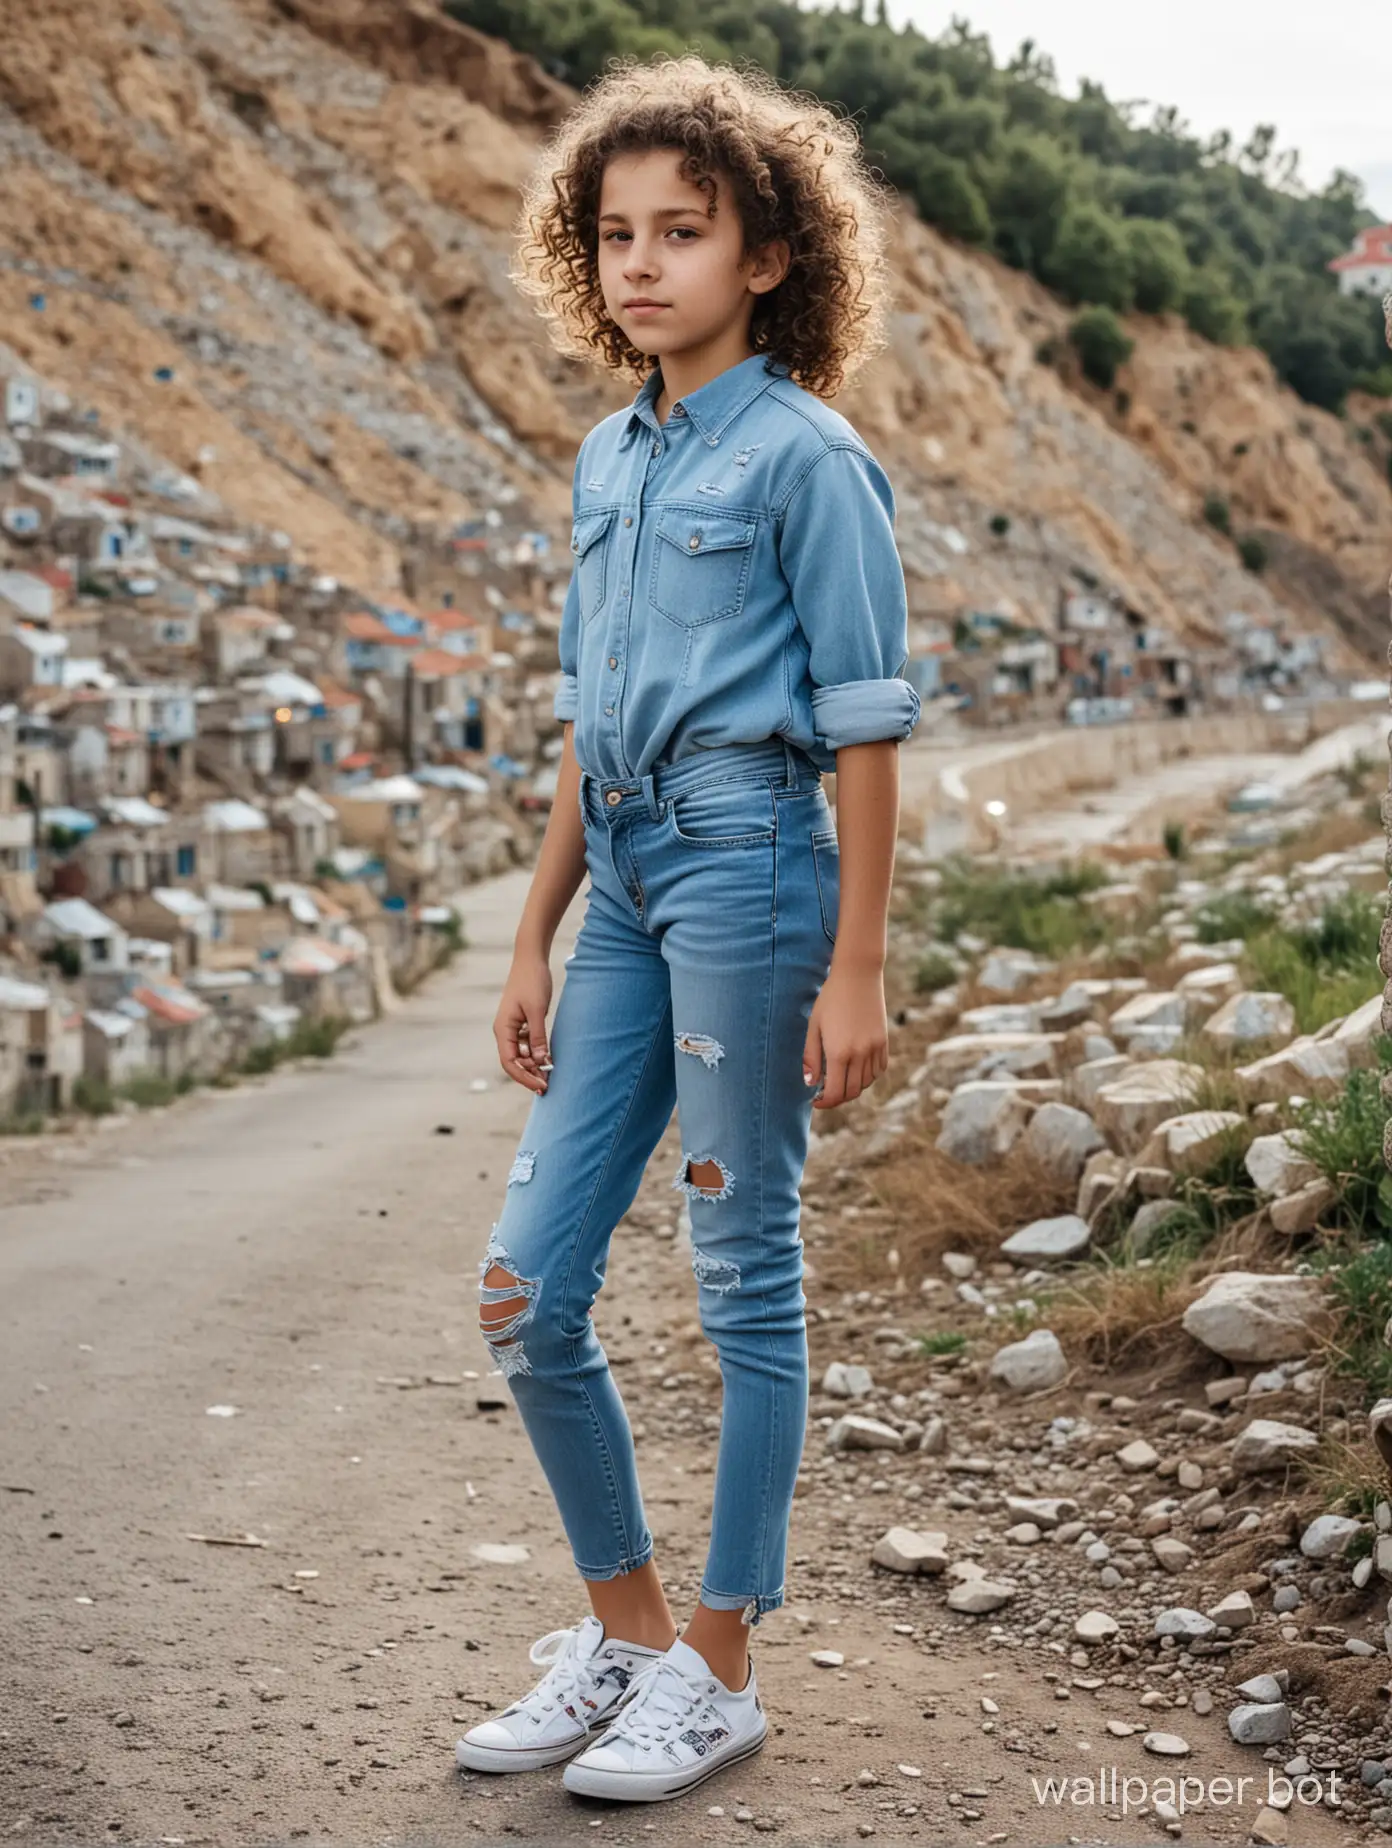 CurlyHaired-Girl-in-Distressed-Jeans-overlooking-Crimeas-Quaint-Townscape